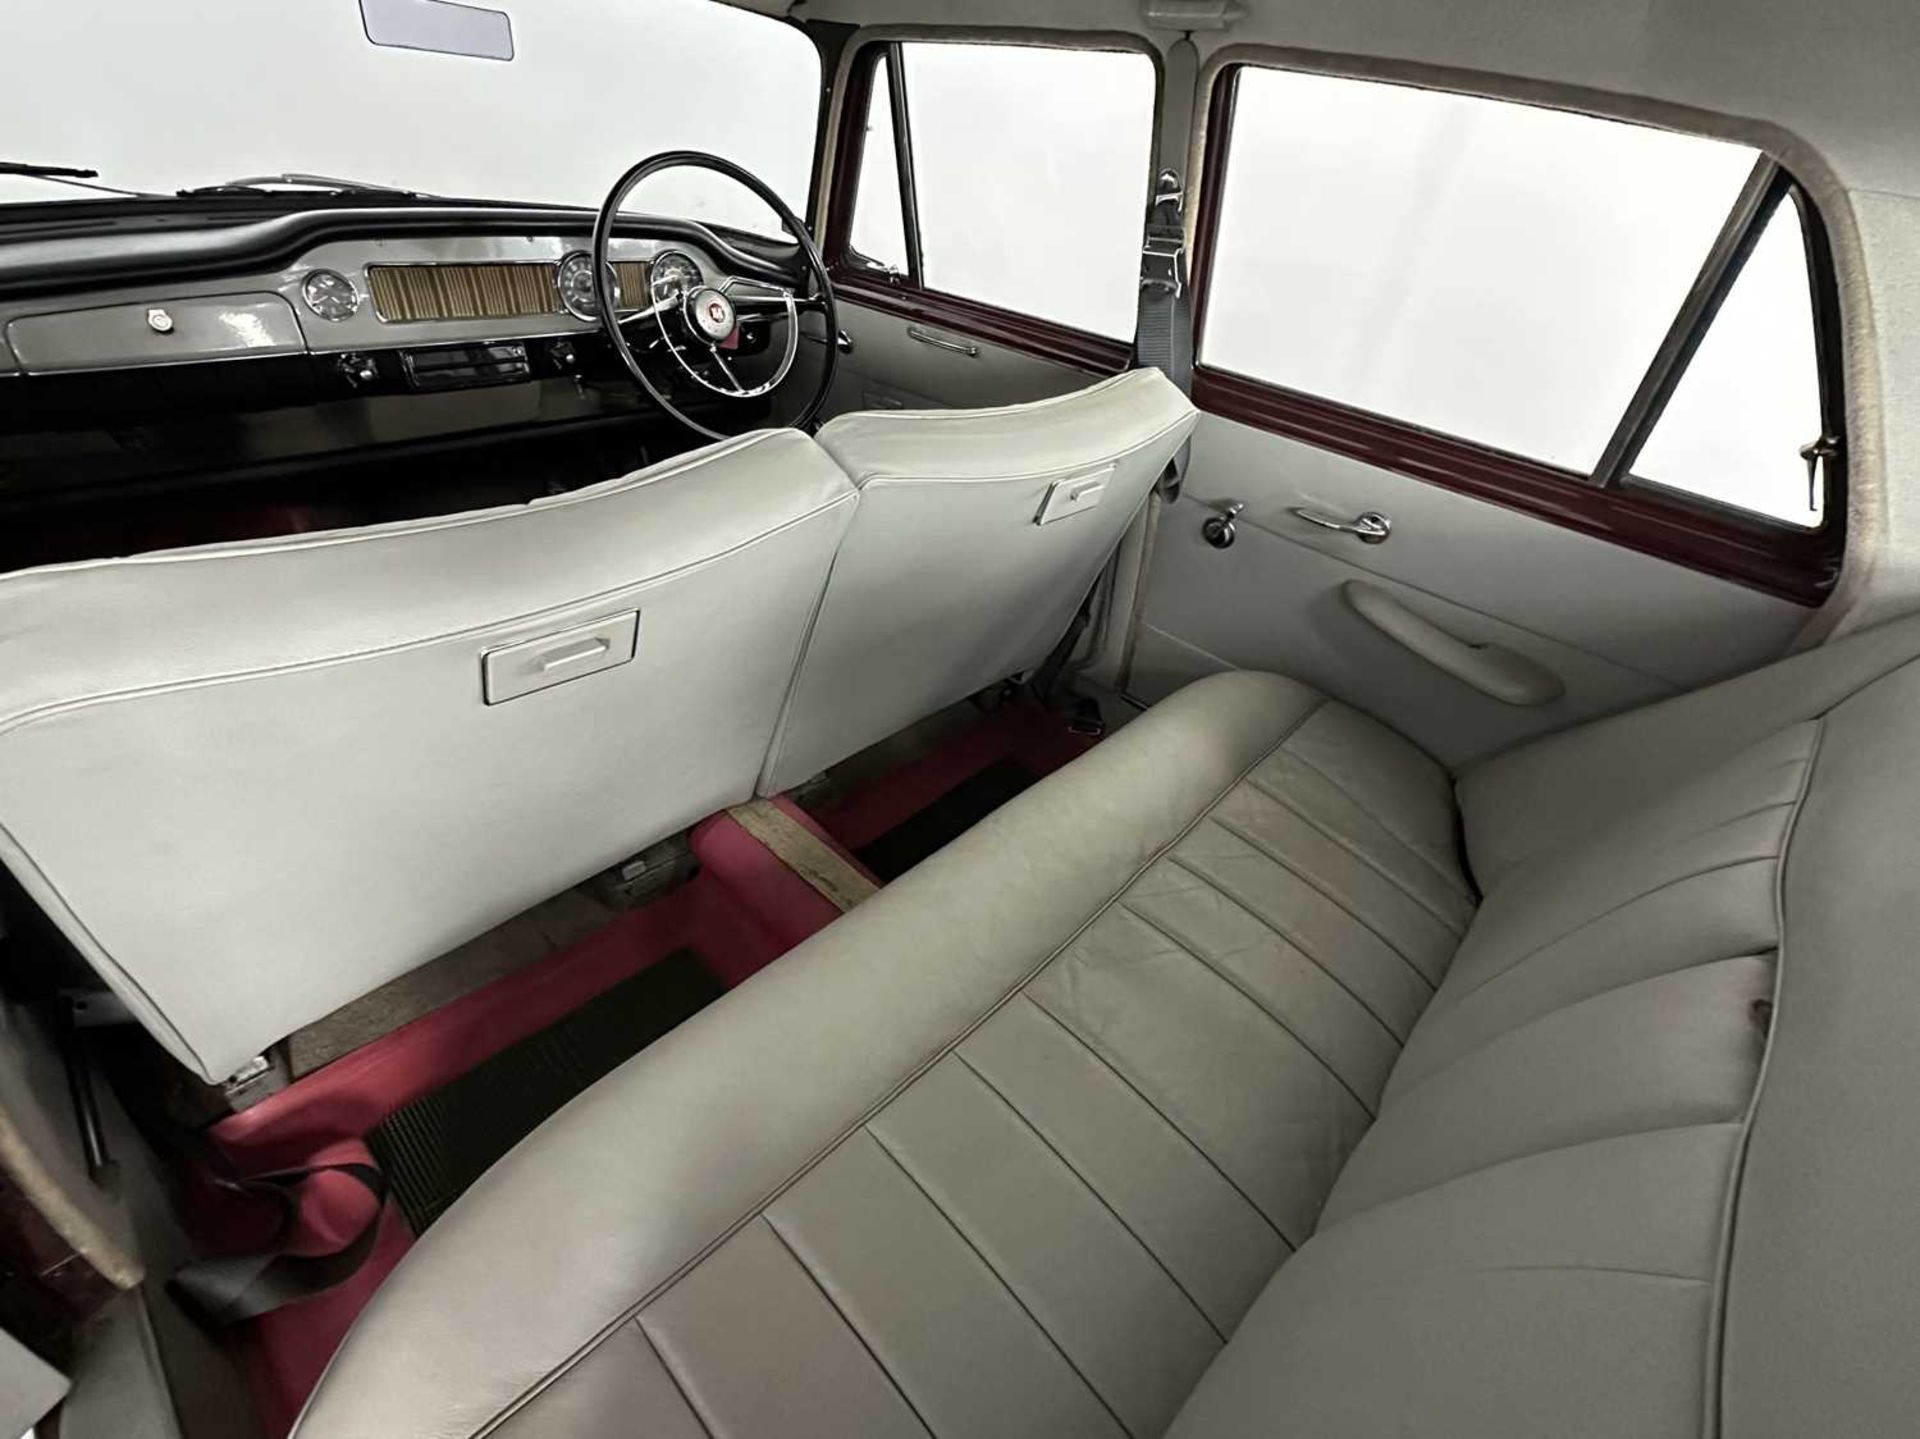 1963 Morris Oxford - NO RESERVE Former long term museum exhibit - Image 25 of 34